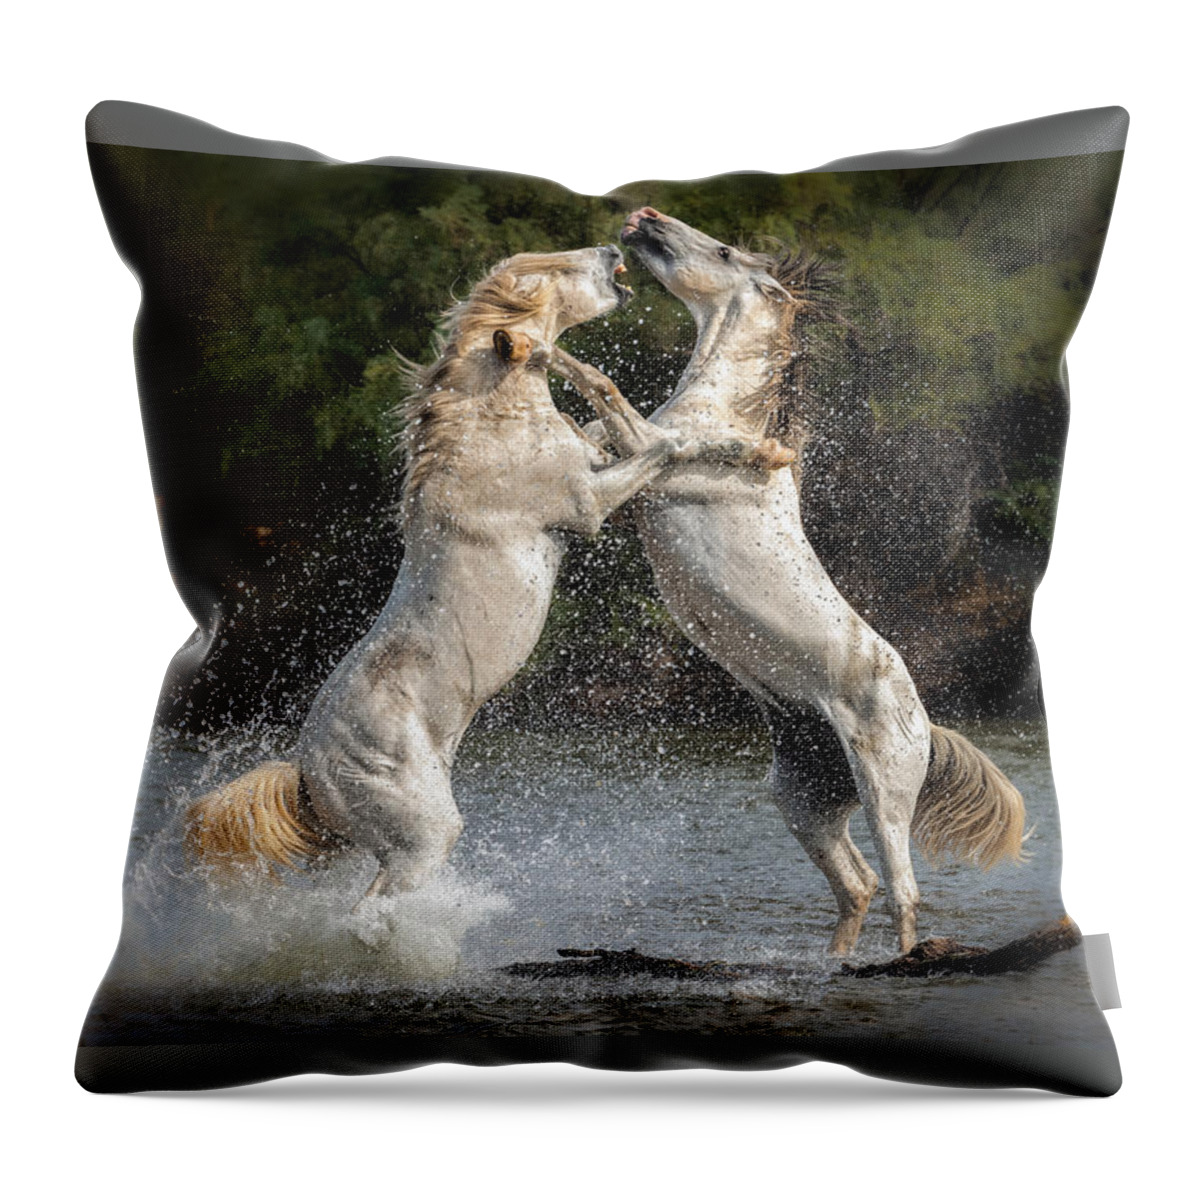 Equine Throw Pillow featuring the photograph Heated Discussion by Lisa Manifold